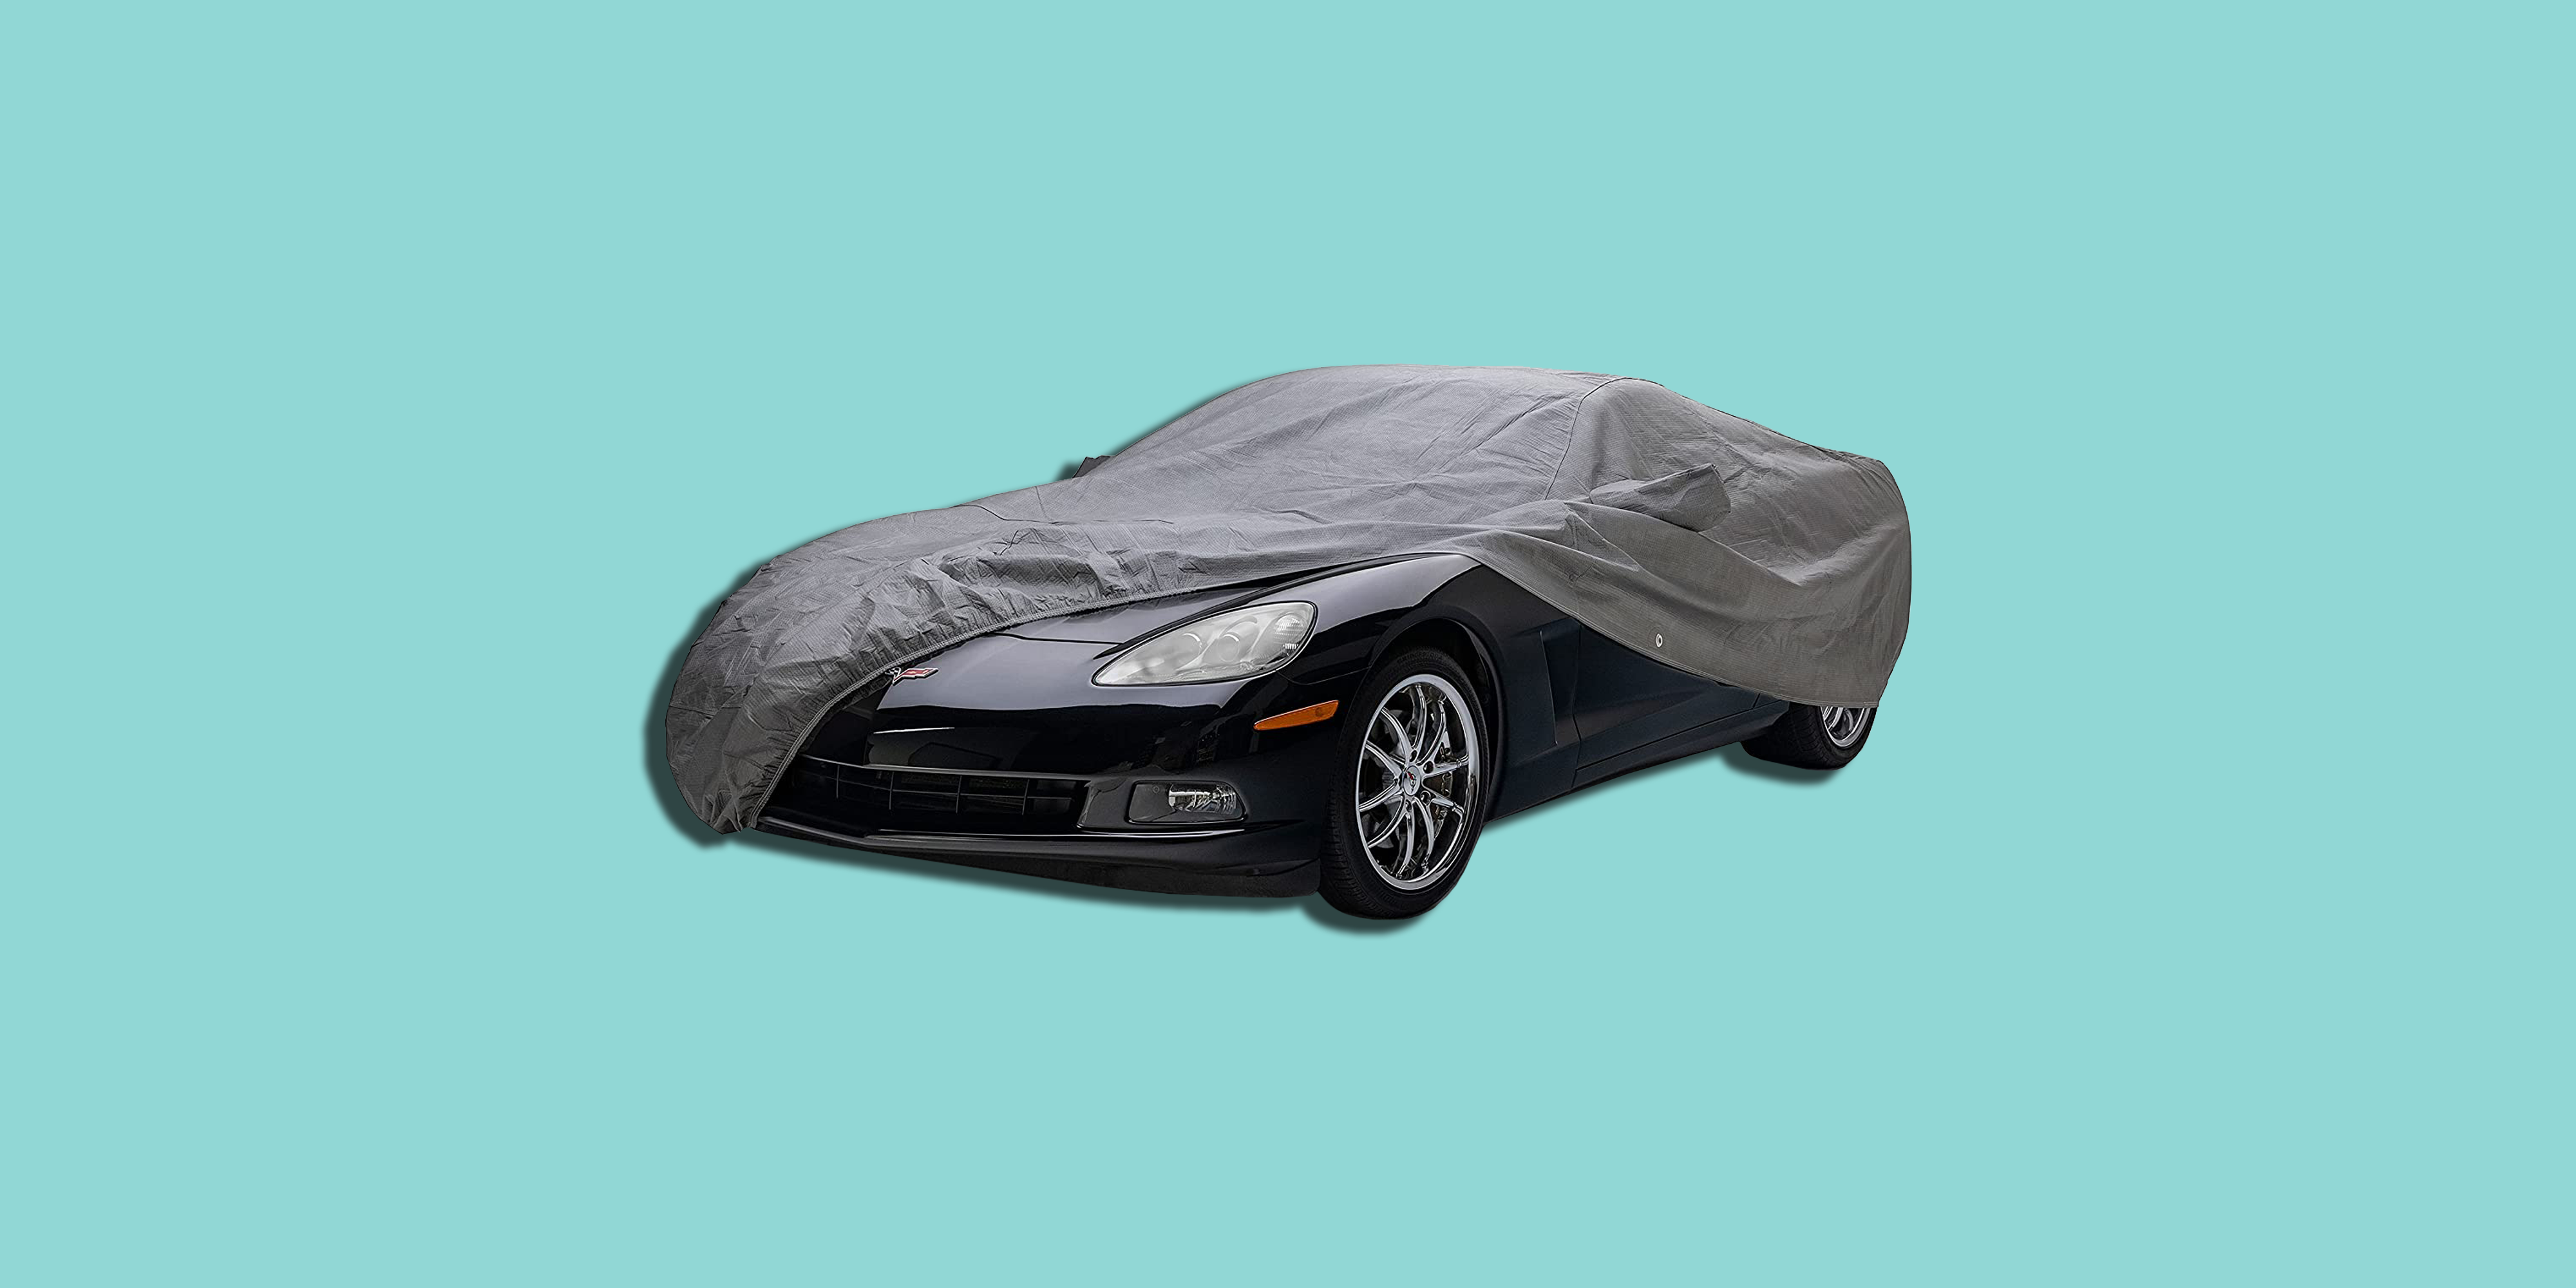 The Best Car Covers to Protect Your Vehicle